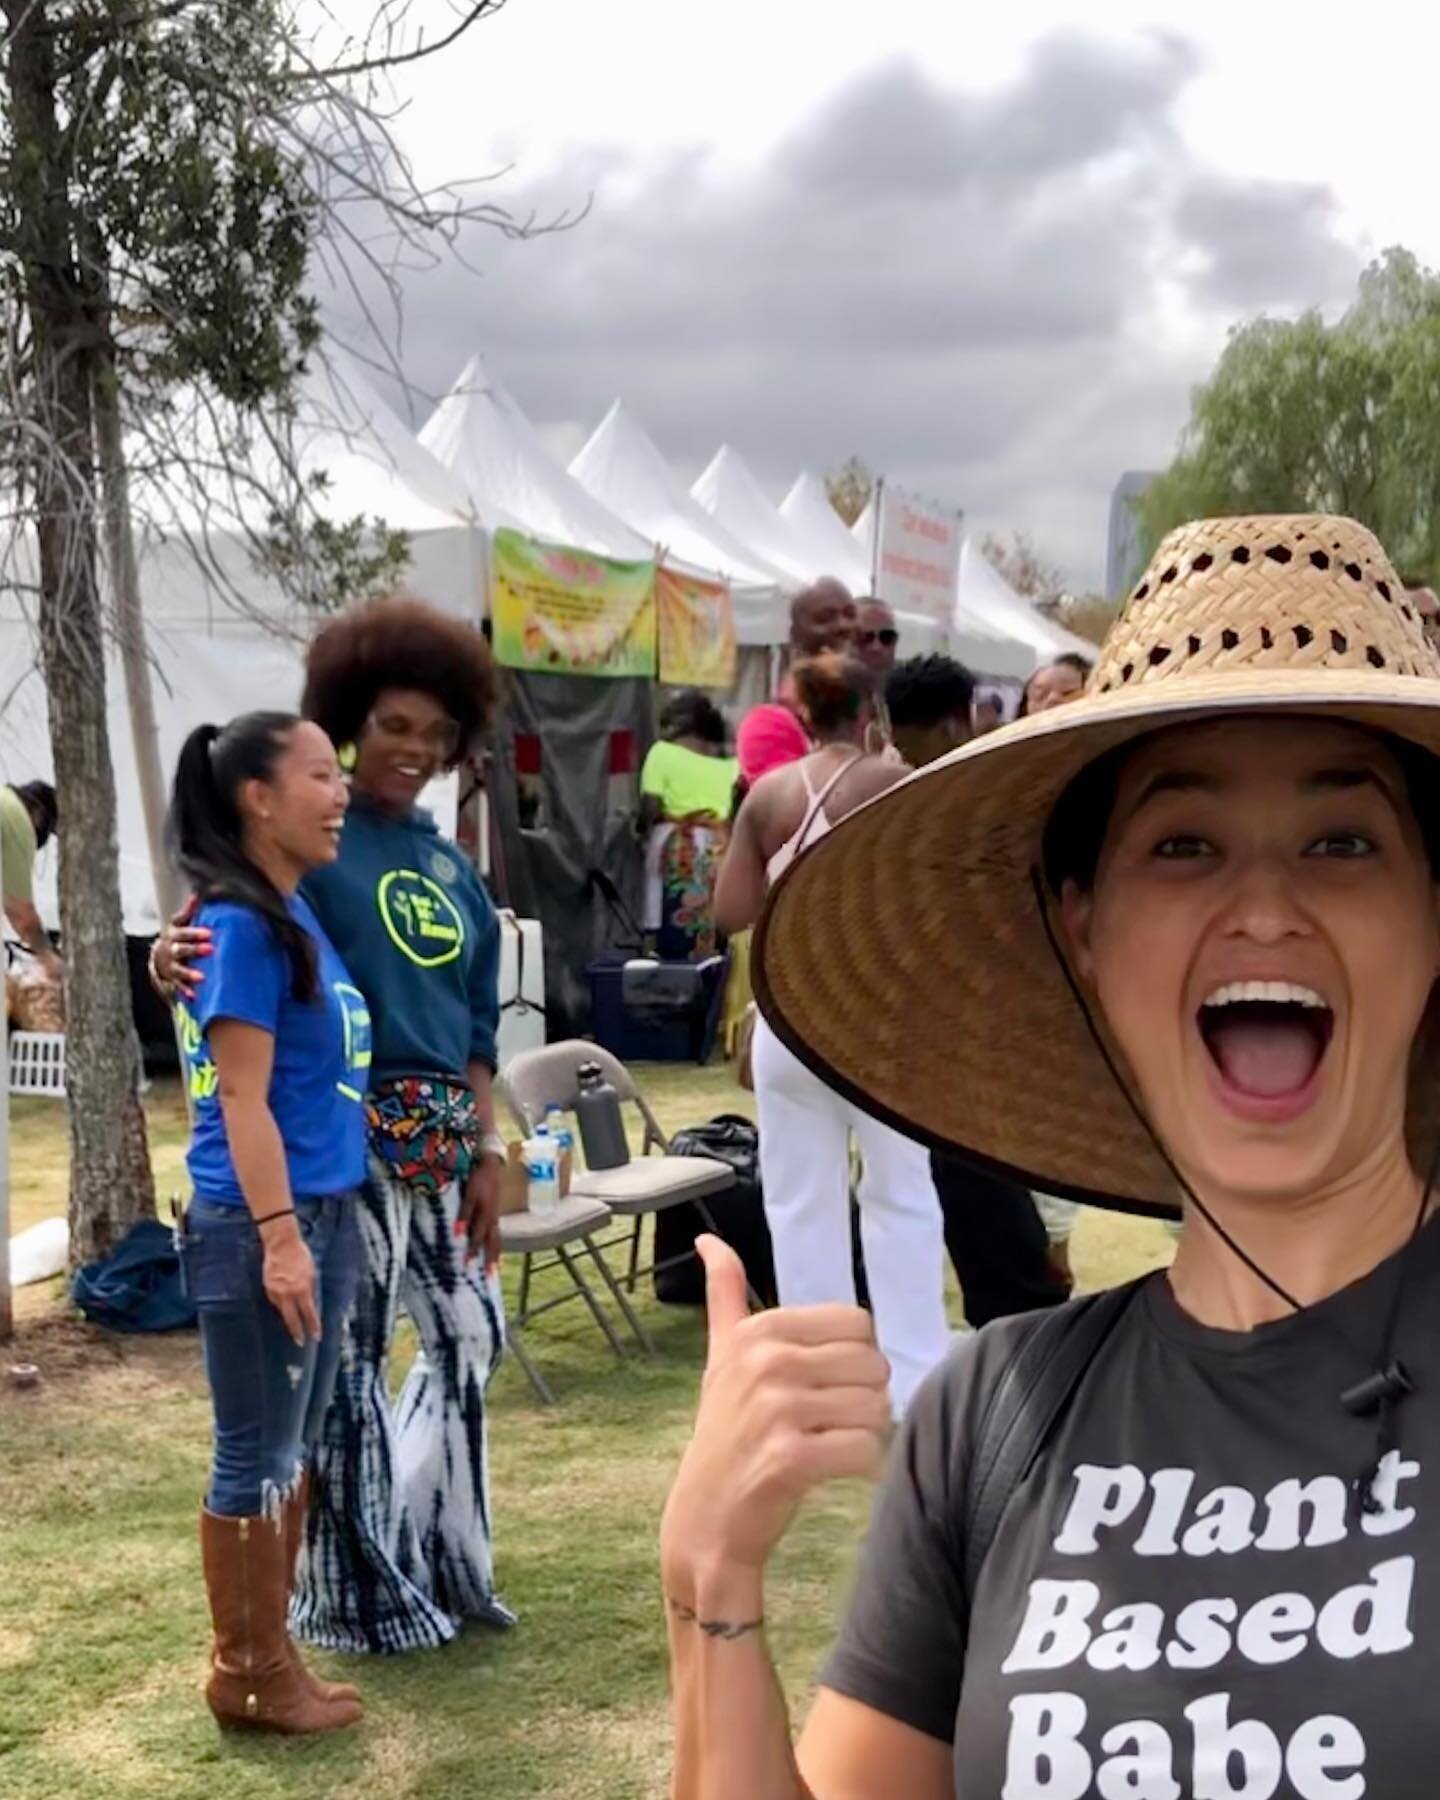 When you see some epic vegan boss ladies @thekoreanvegan @iamtabithabrown at the yummy @vegandalefestival while eating @kalemyname 🤣

#food #fit #focus #foodfitfocus #nutrition #fitness #happiness #personaltrainer #healthcoach #plantbased #plantpowe